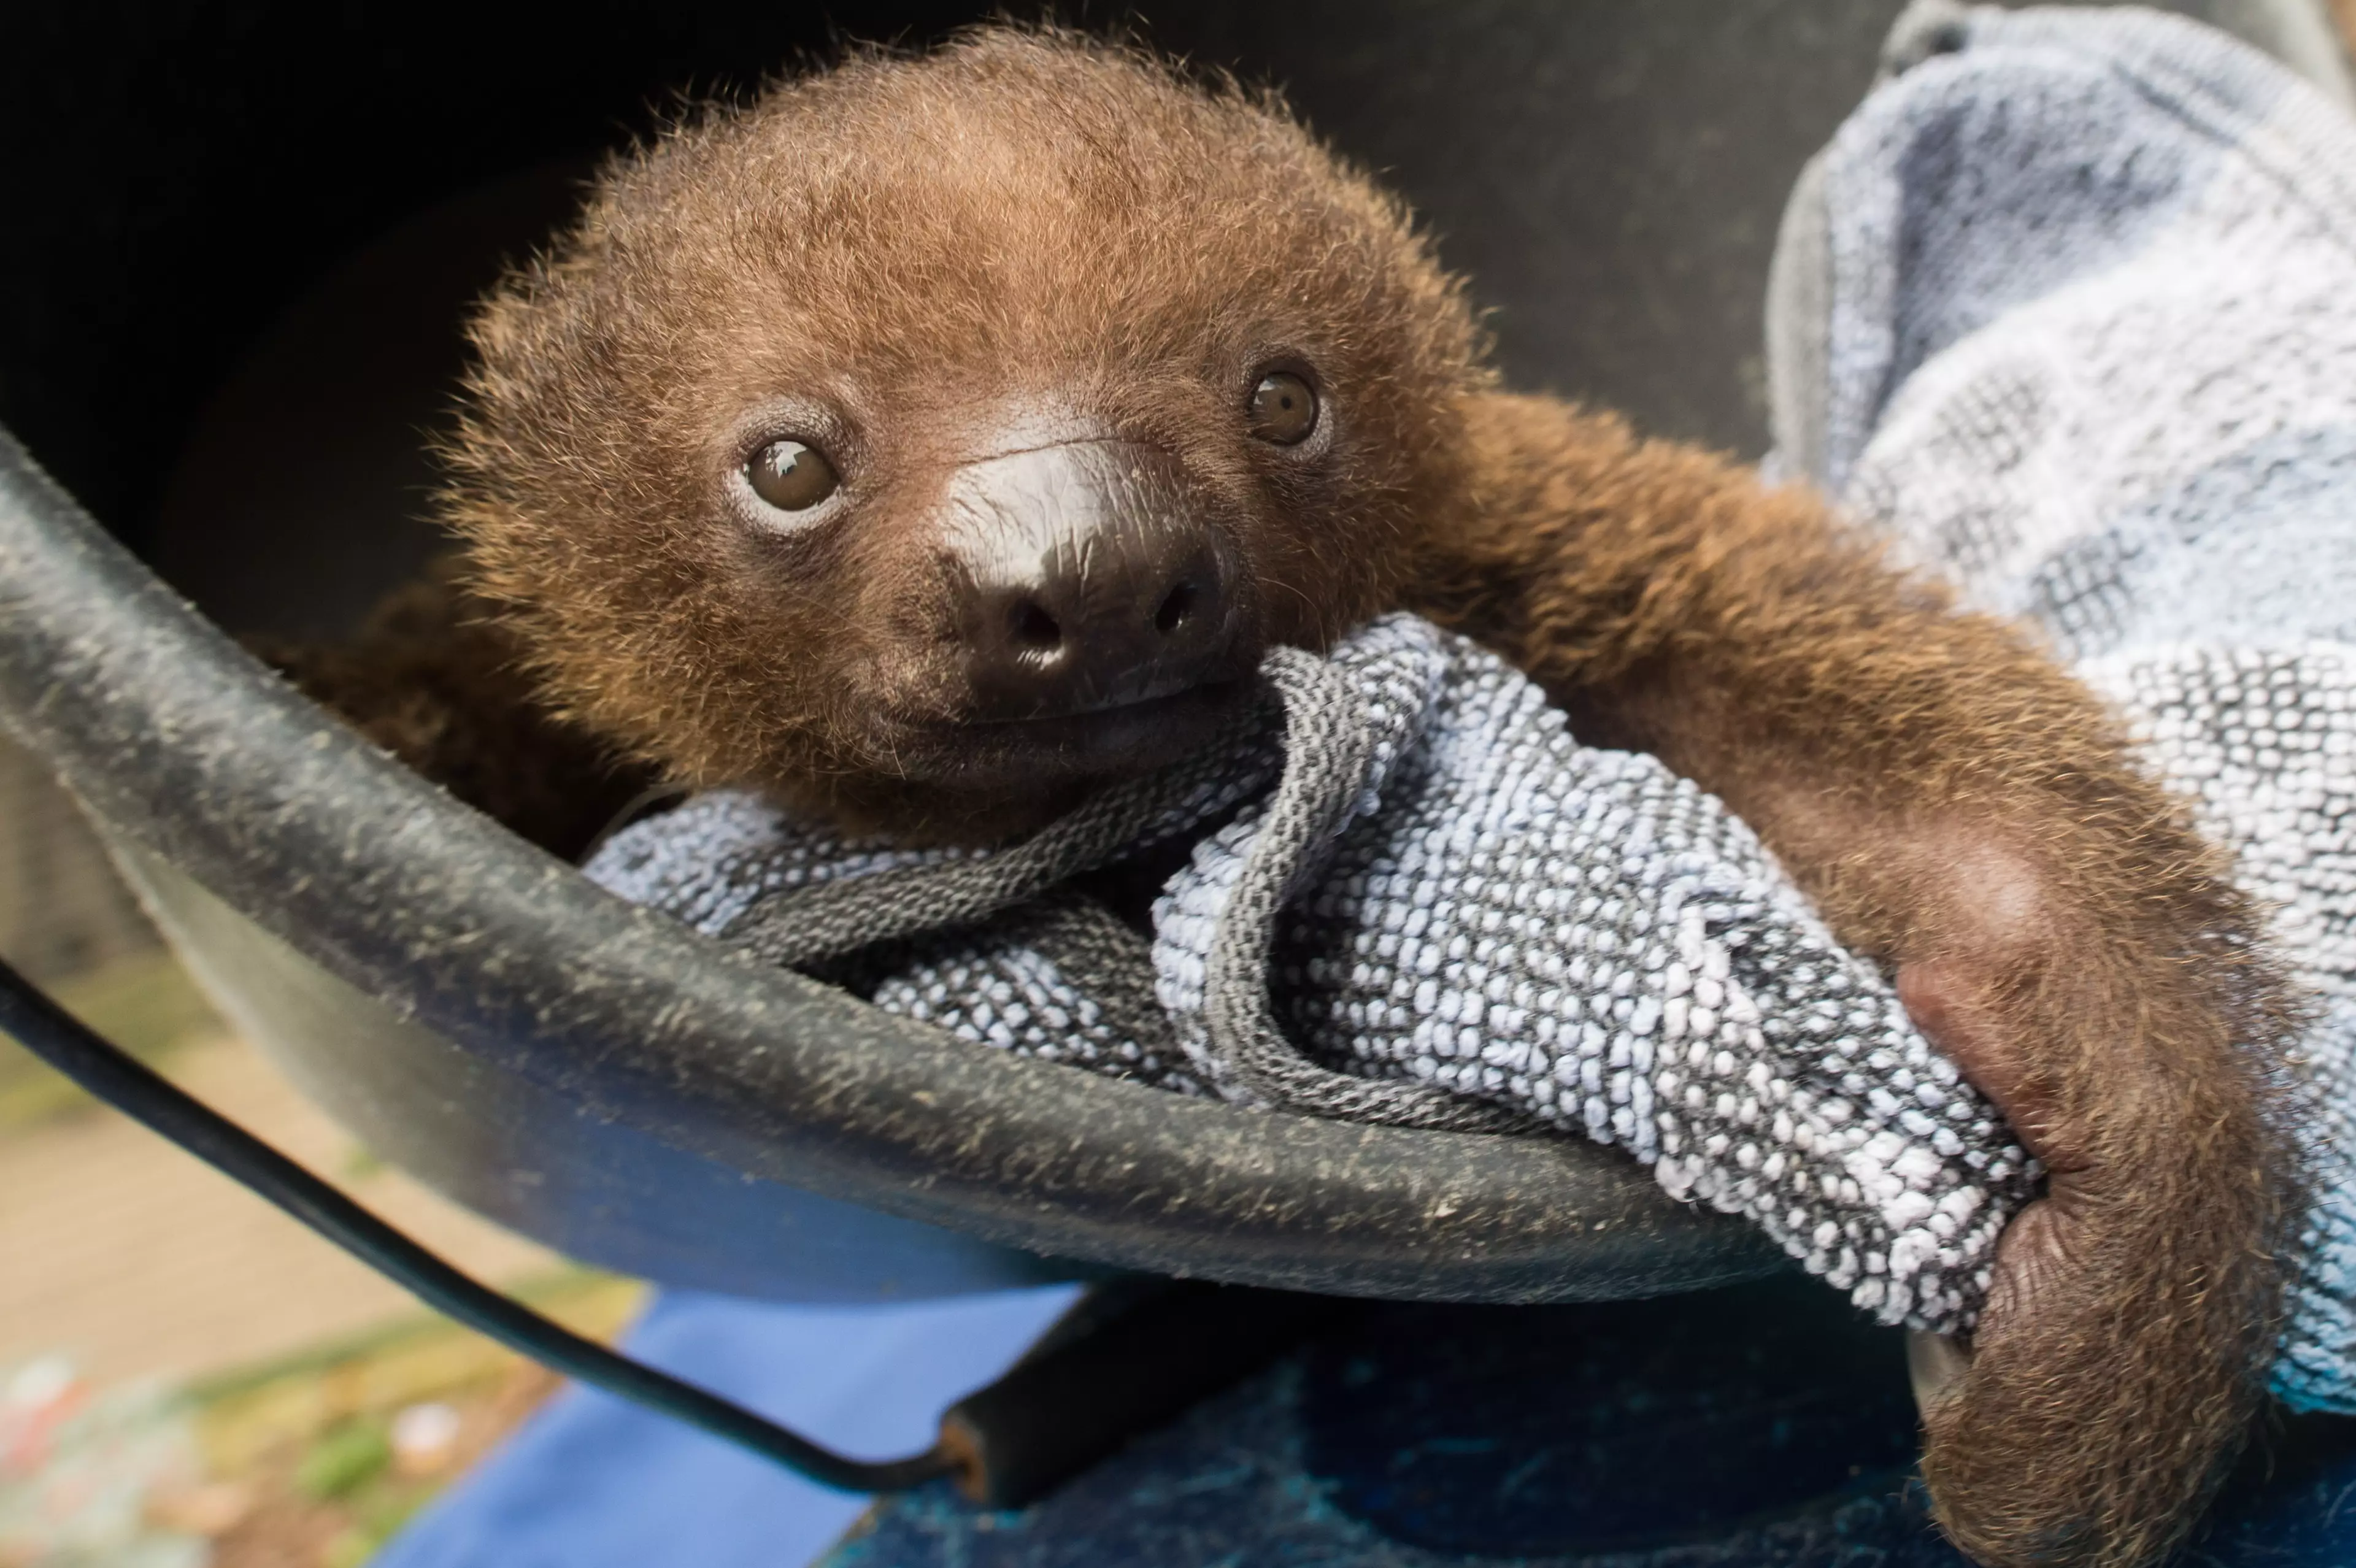 This article is about old sloths, but here's a baby one - just 'cos.